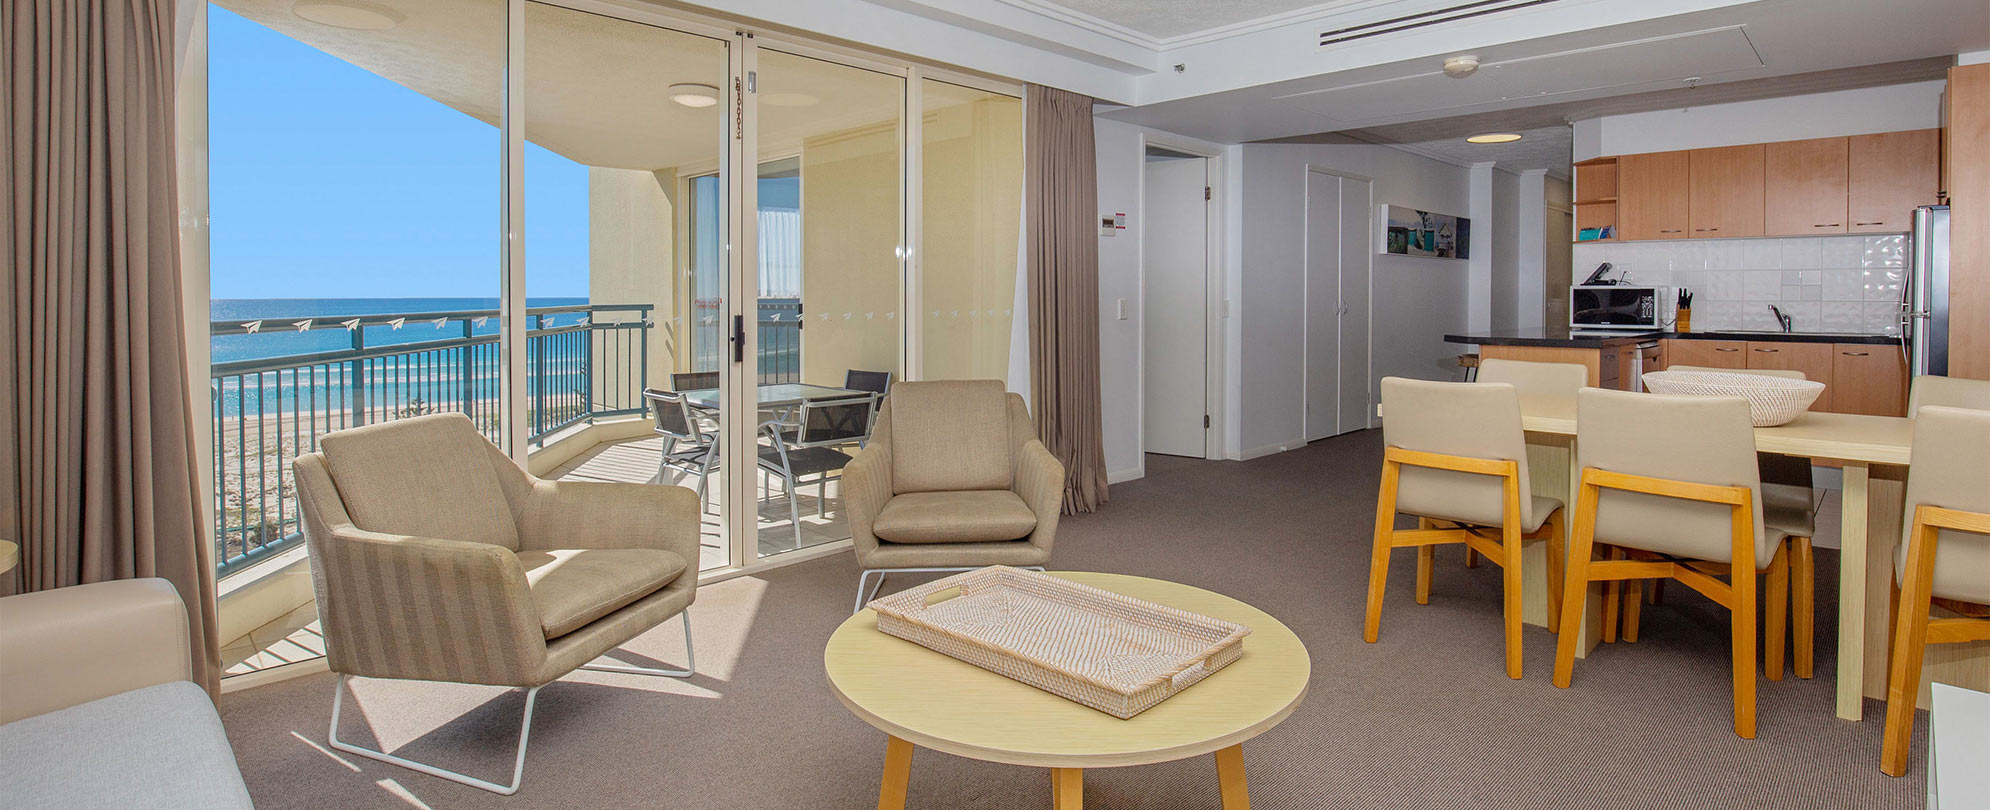 The living area, kitchen, and dining table in a Club Wyndham Kirra Beach ocean view suite.